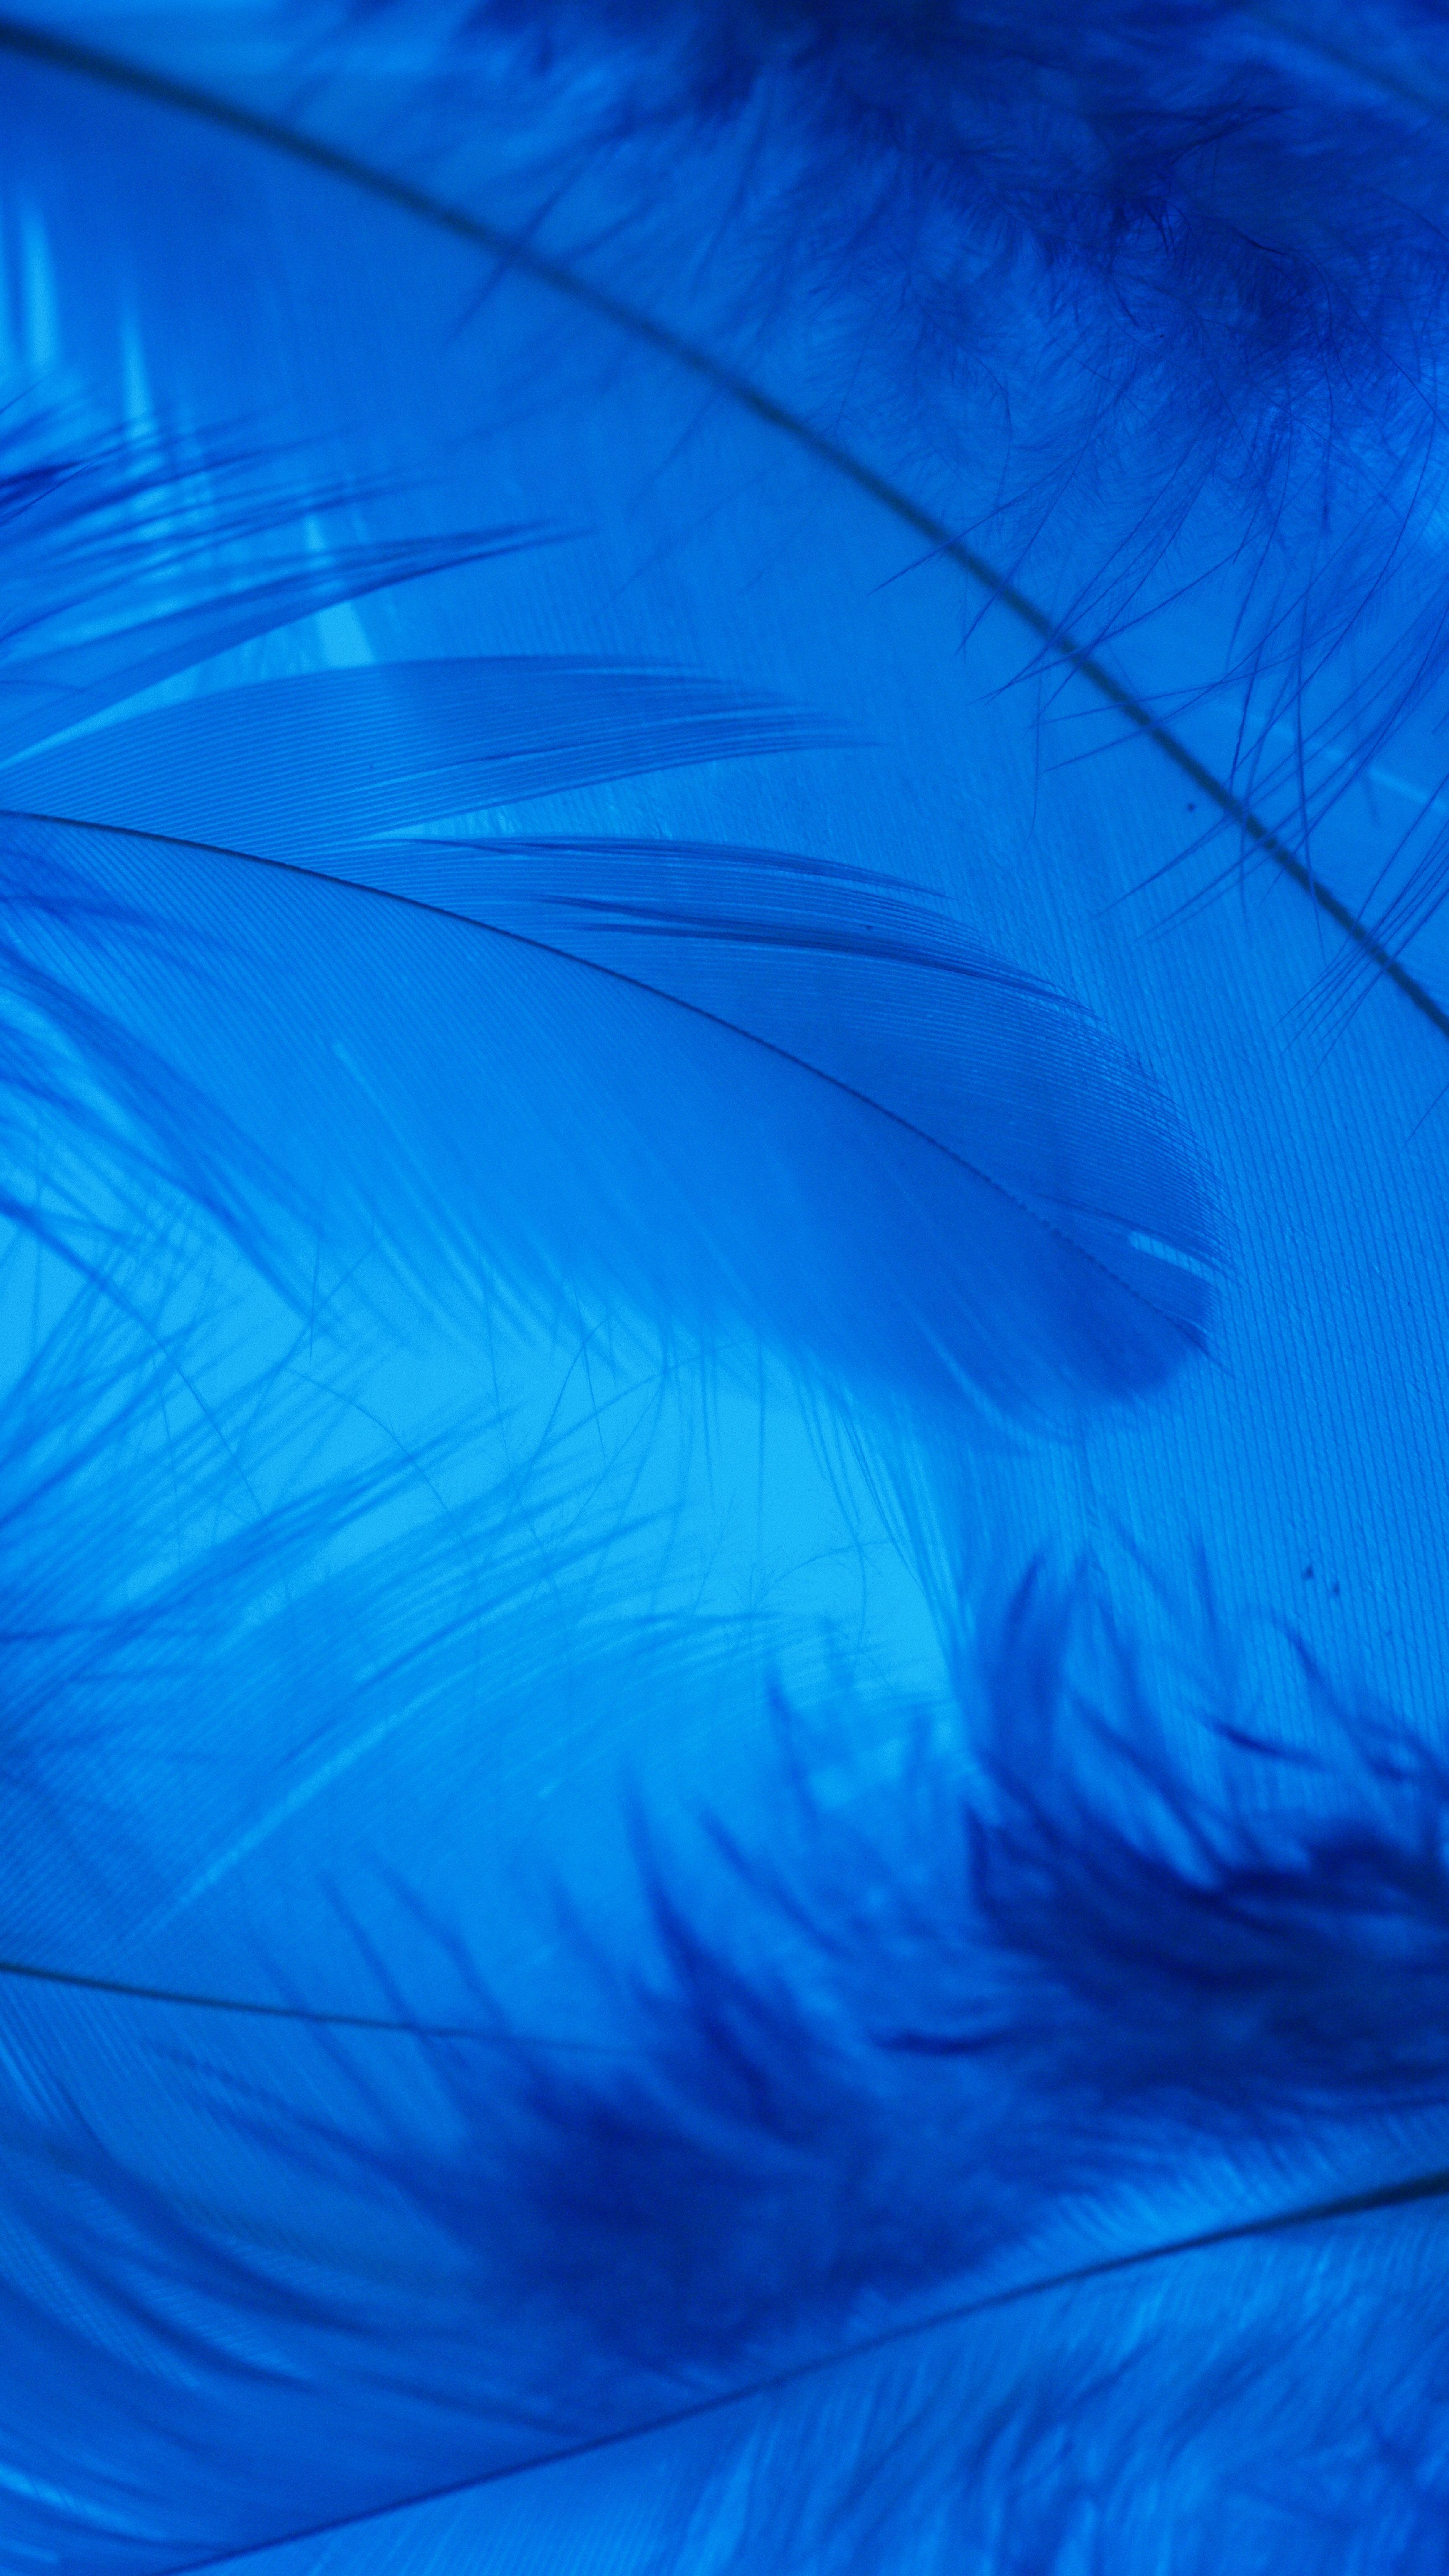 A close up of a blue feather on a white background - Feathers